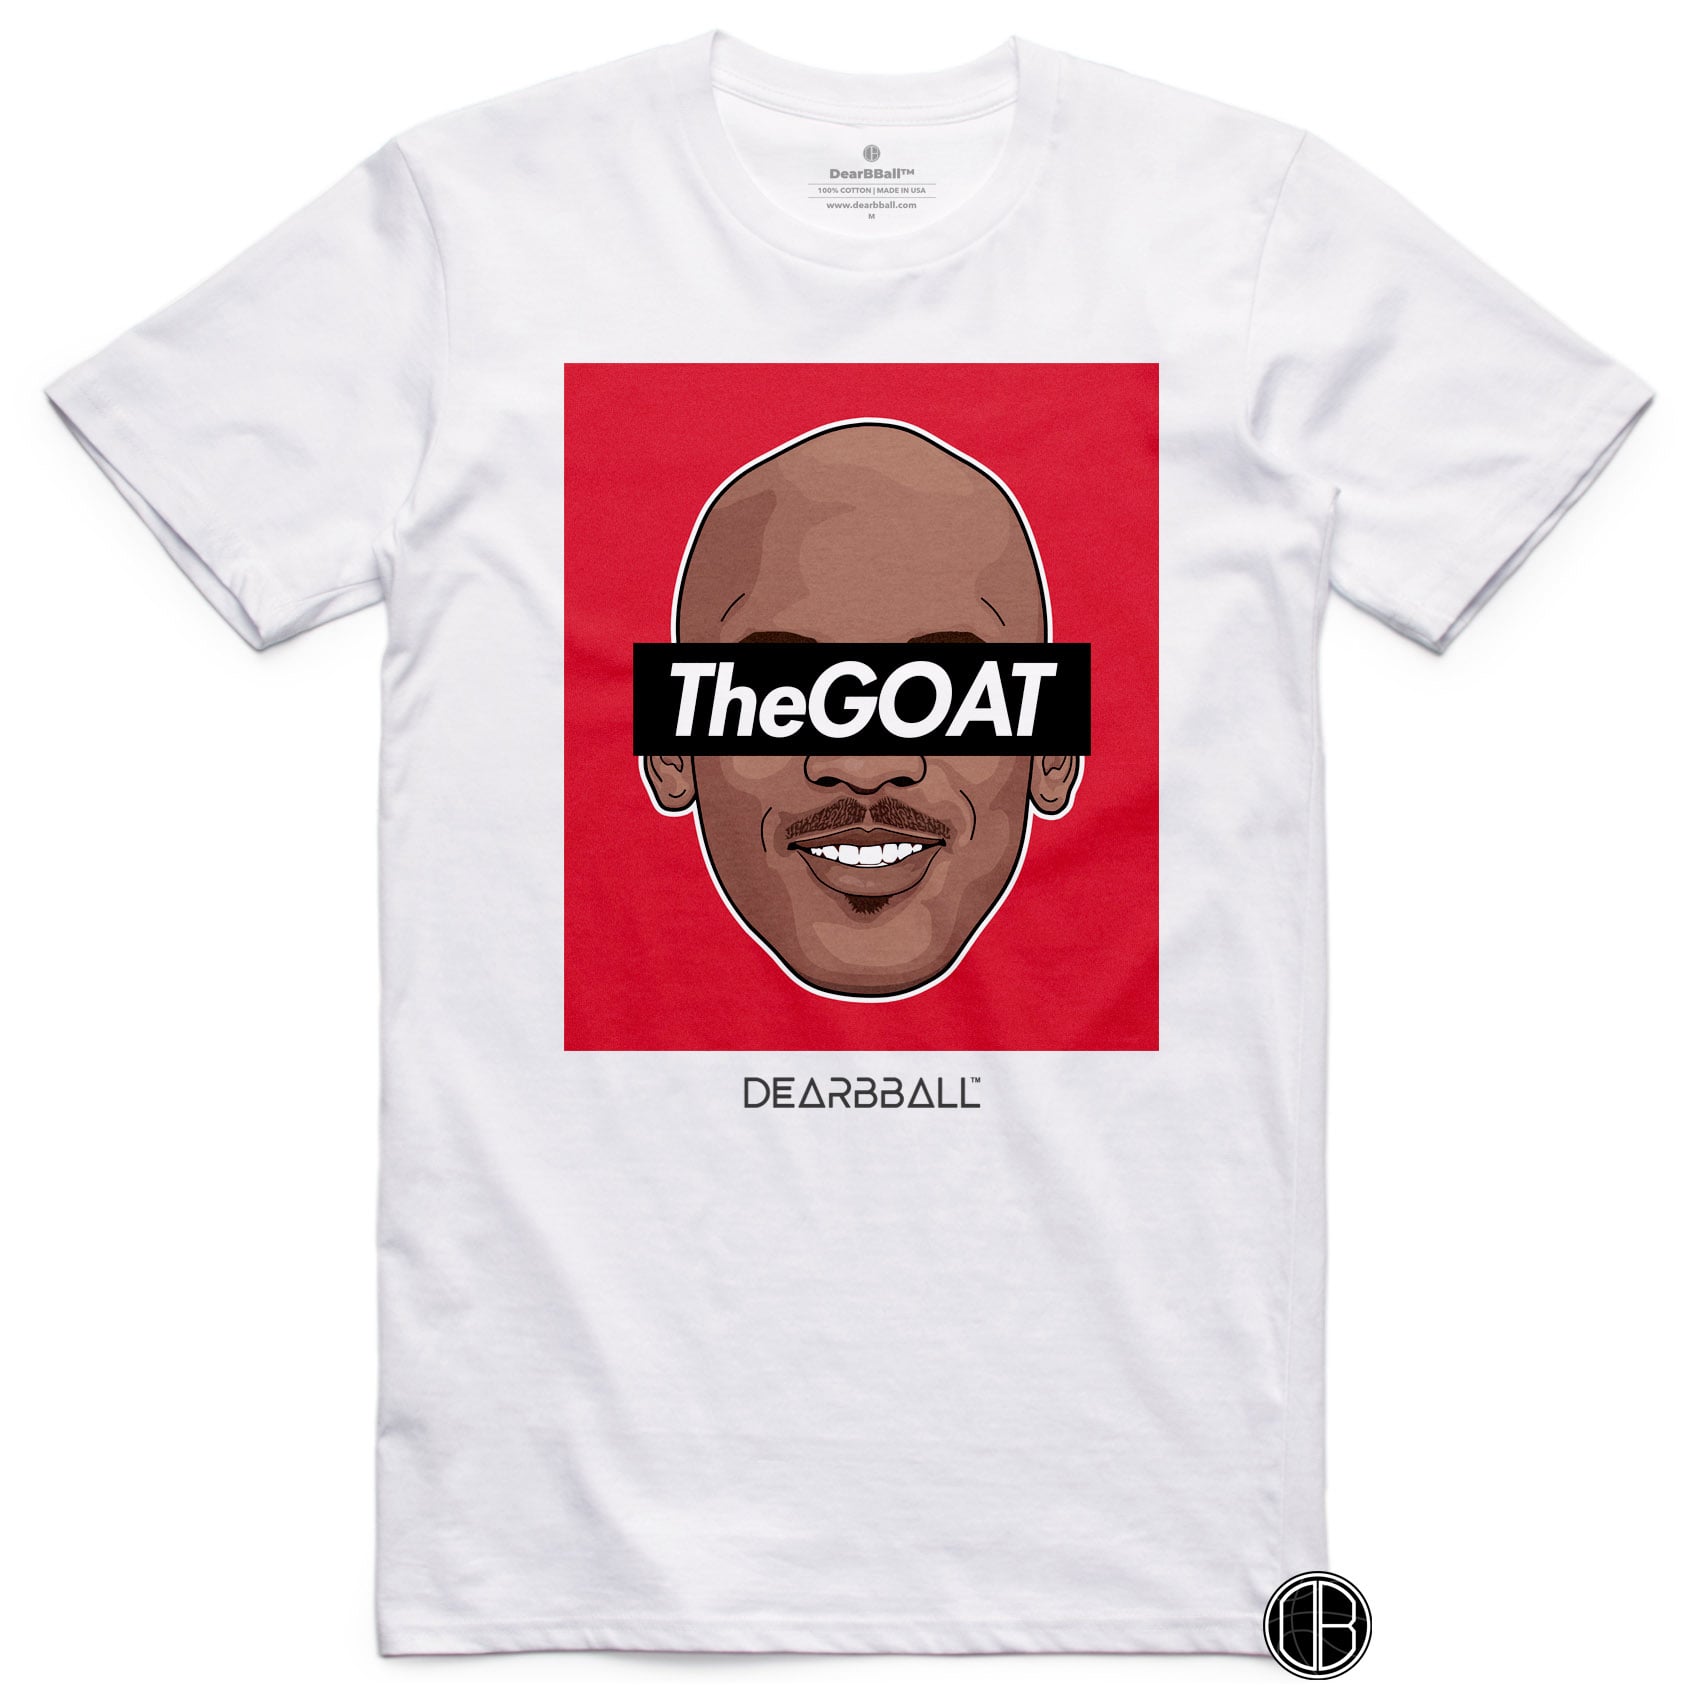 Maglietta DearBBall - TheGOAT Red Edition